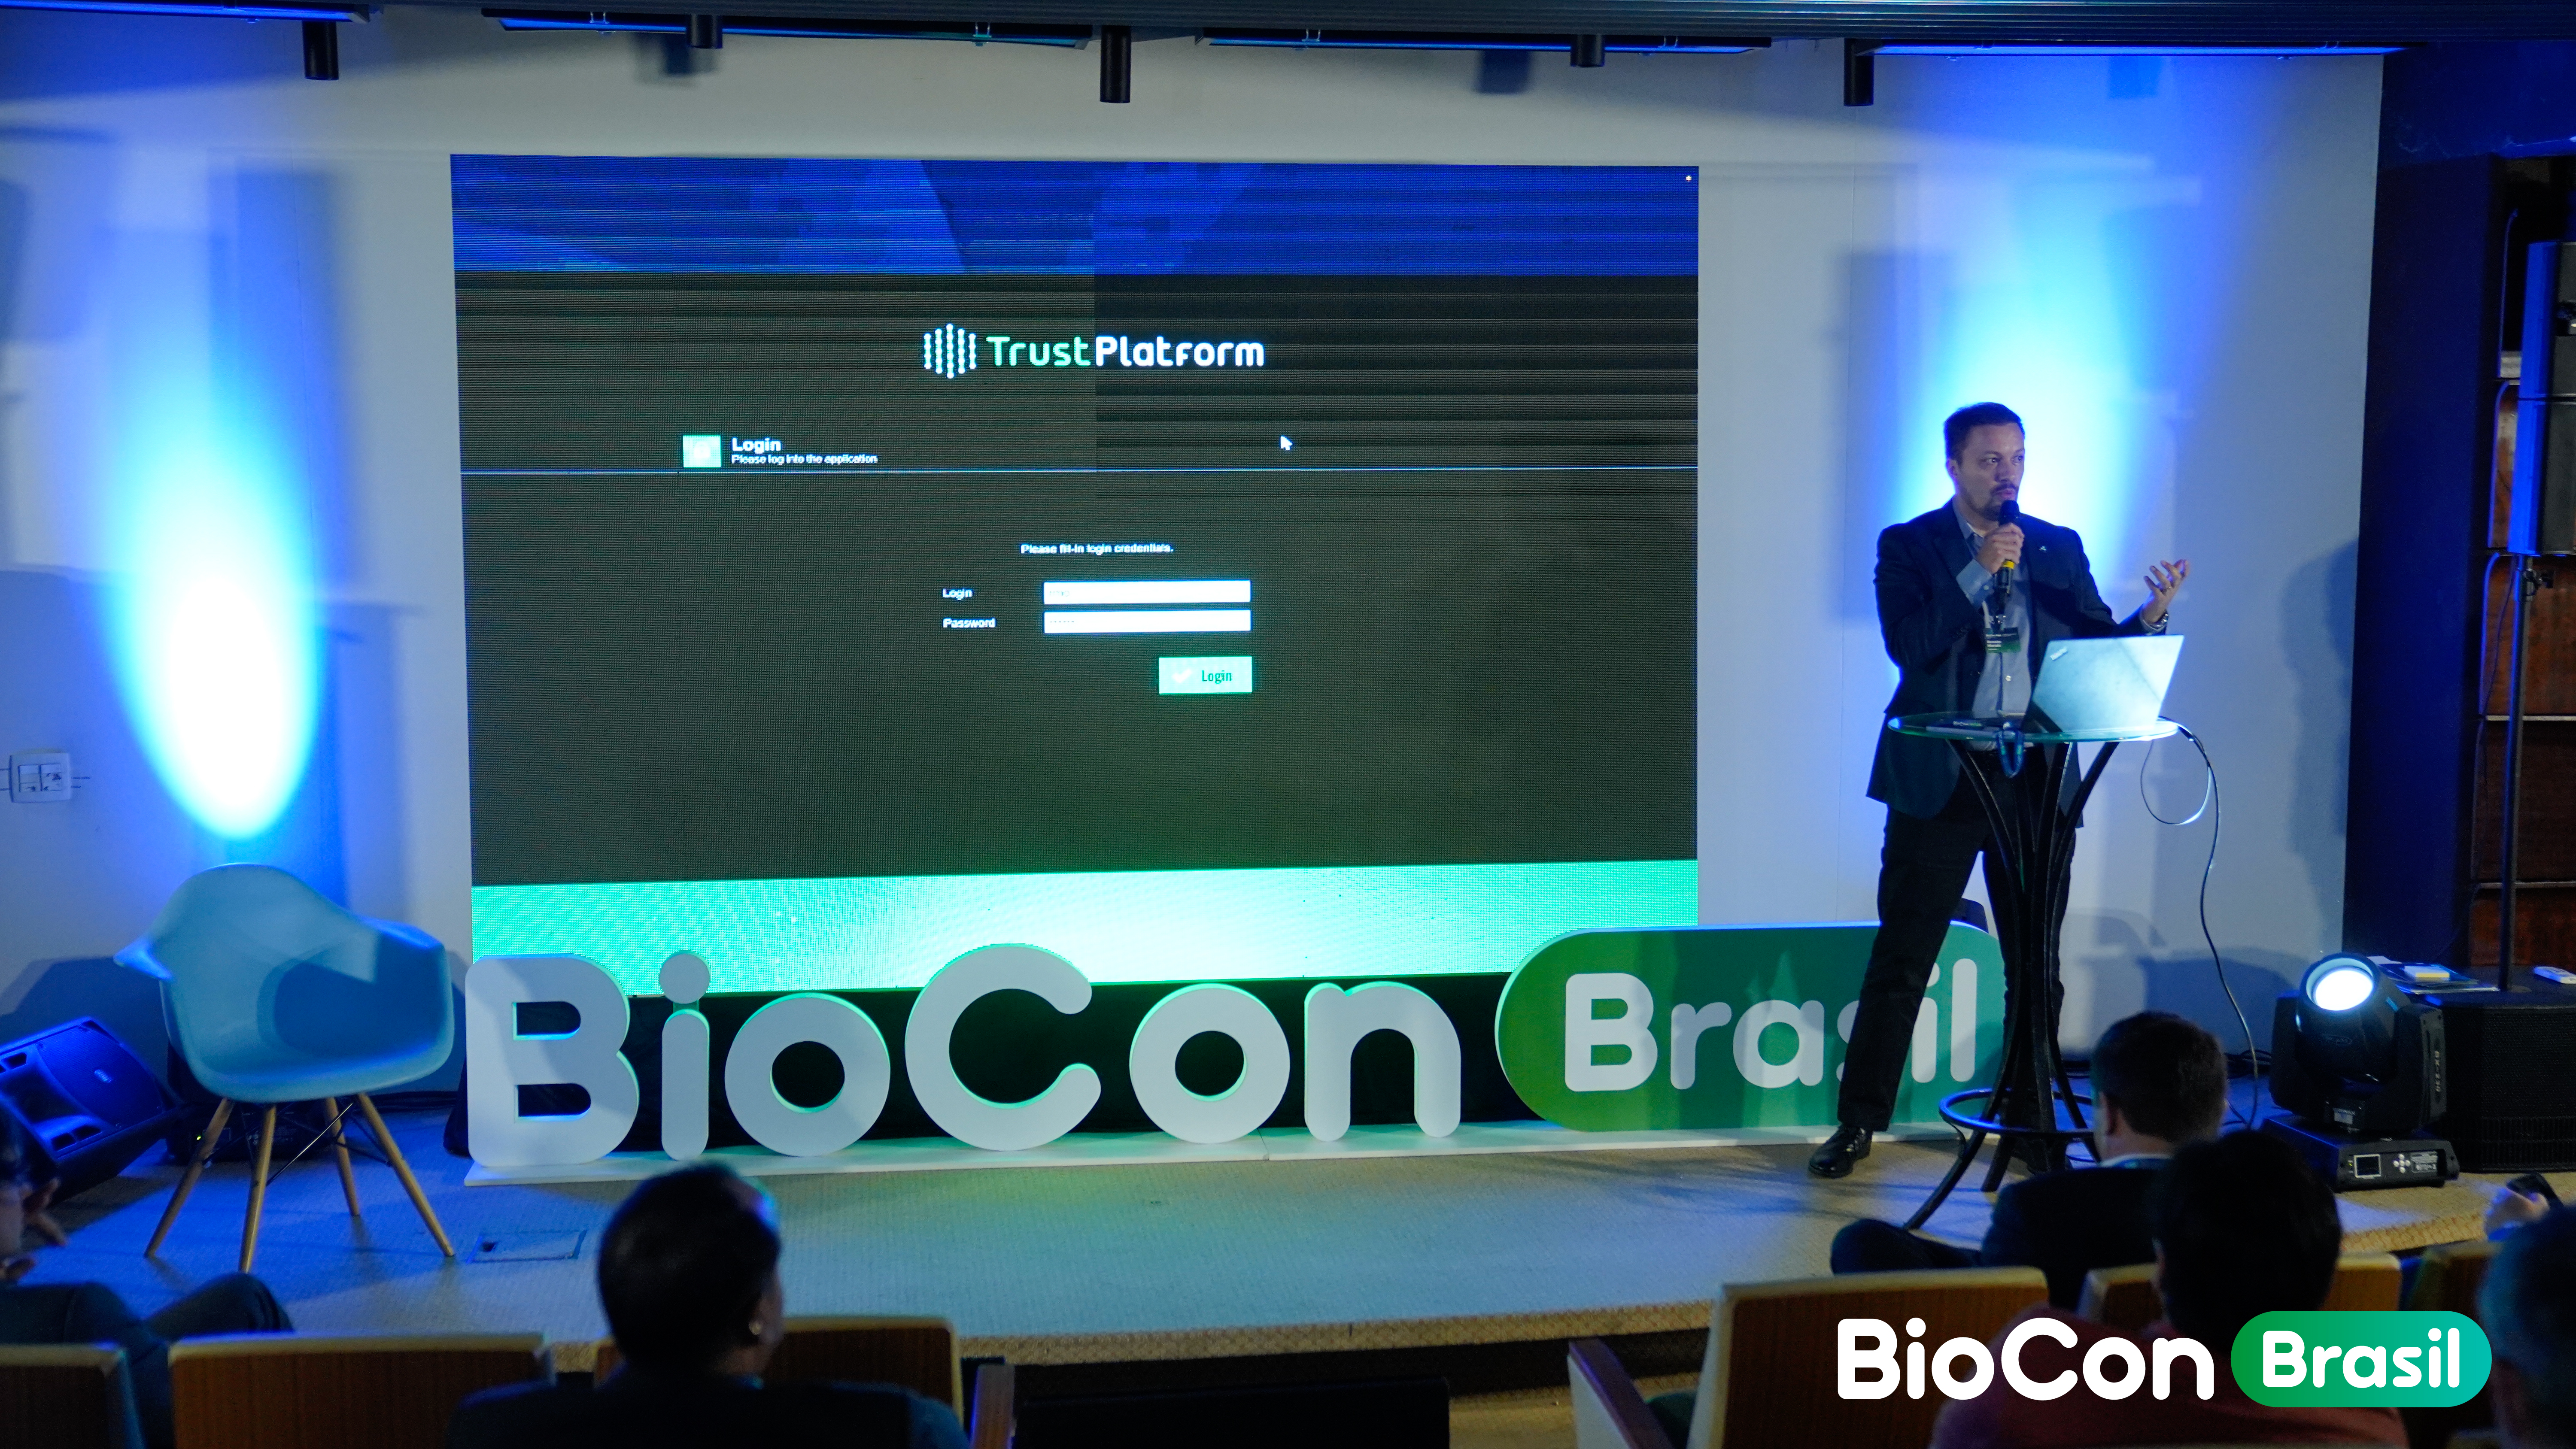 BioCon Brazil Reveals How the Spread of Biometrics in South America Has Improved All Walks of Life